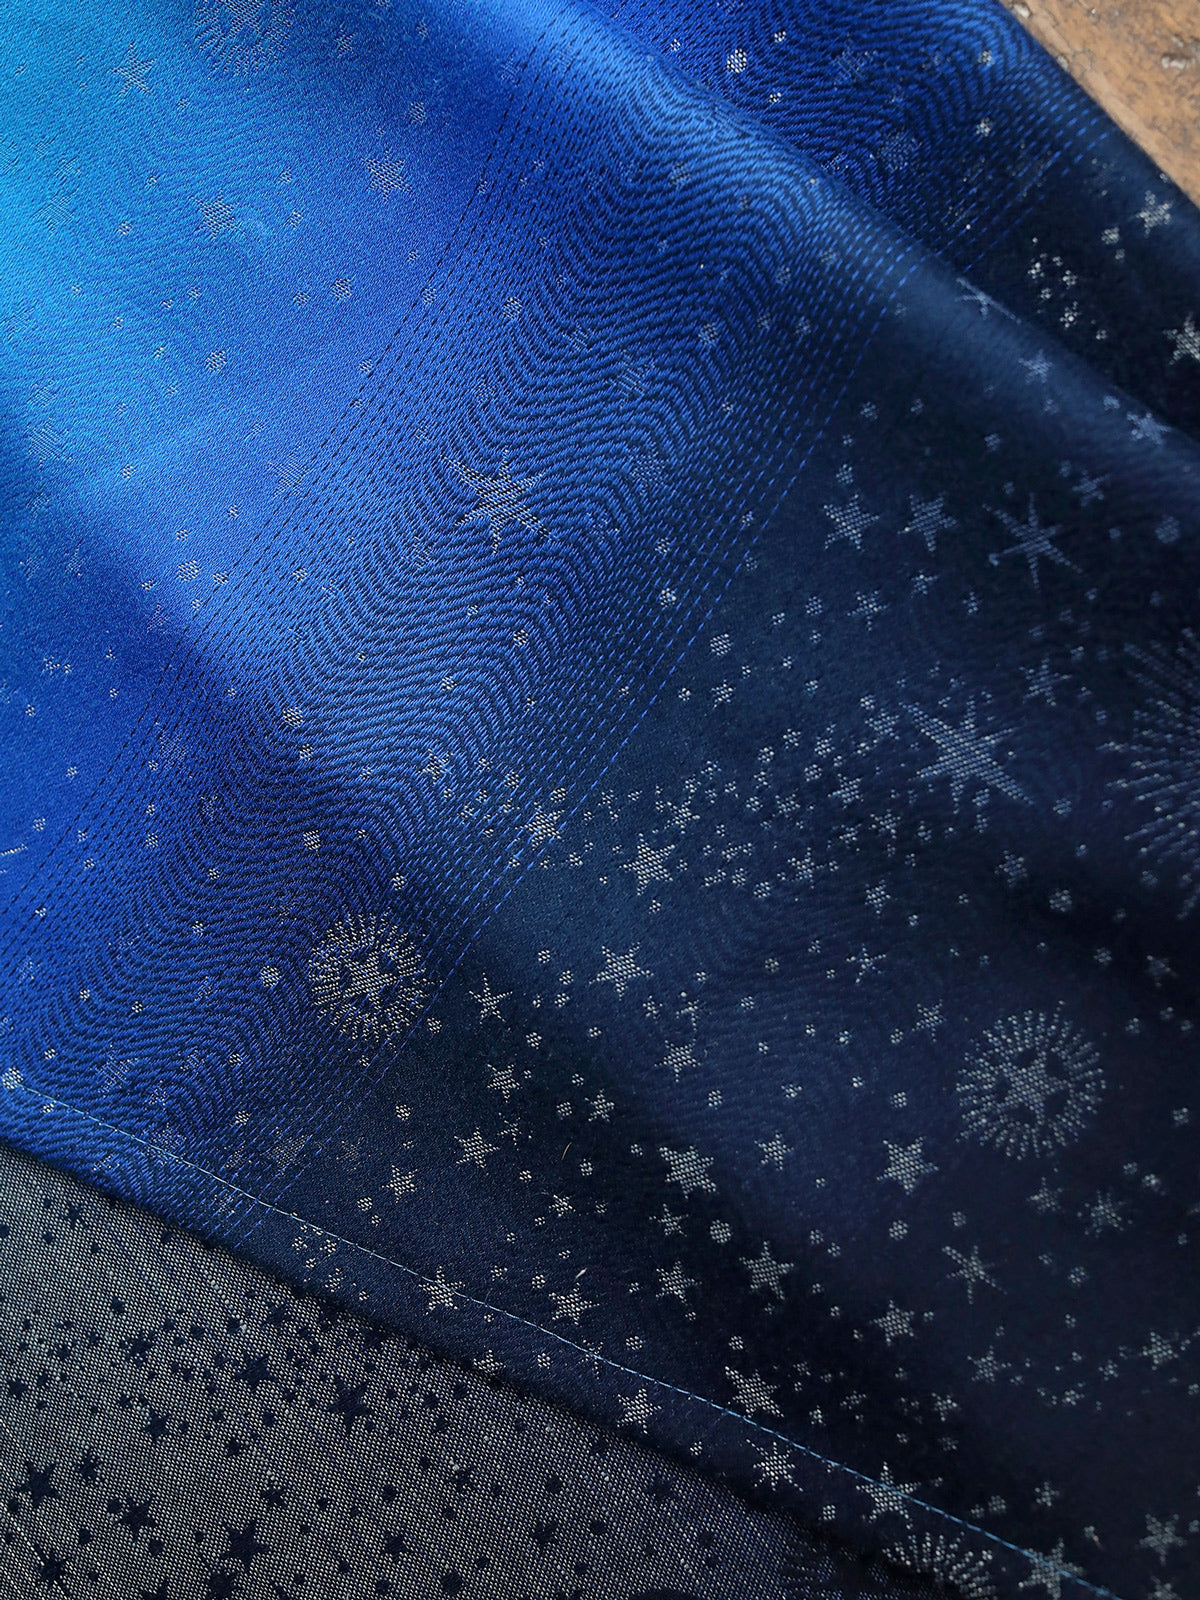 Constellation Tribute to the Stars Baby Wrap